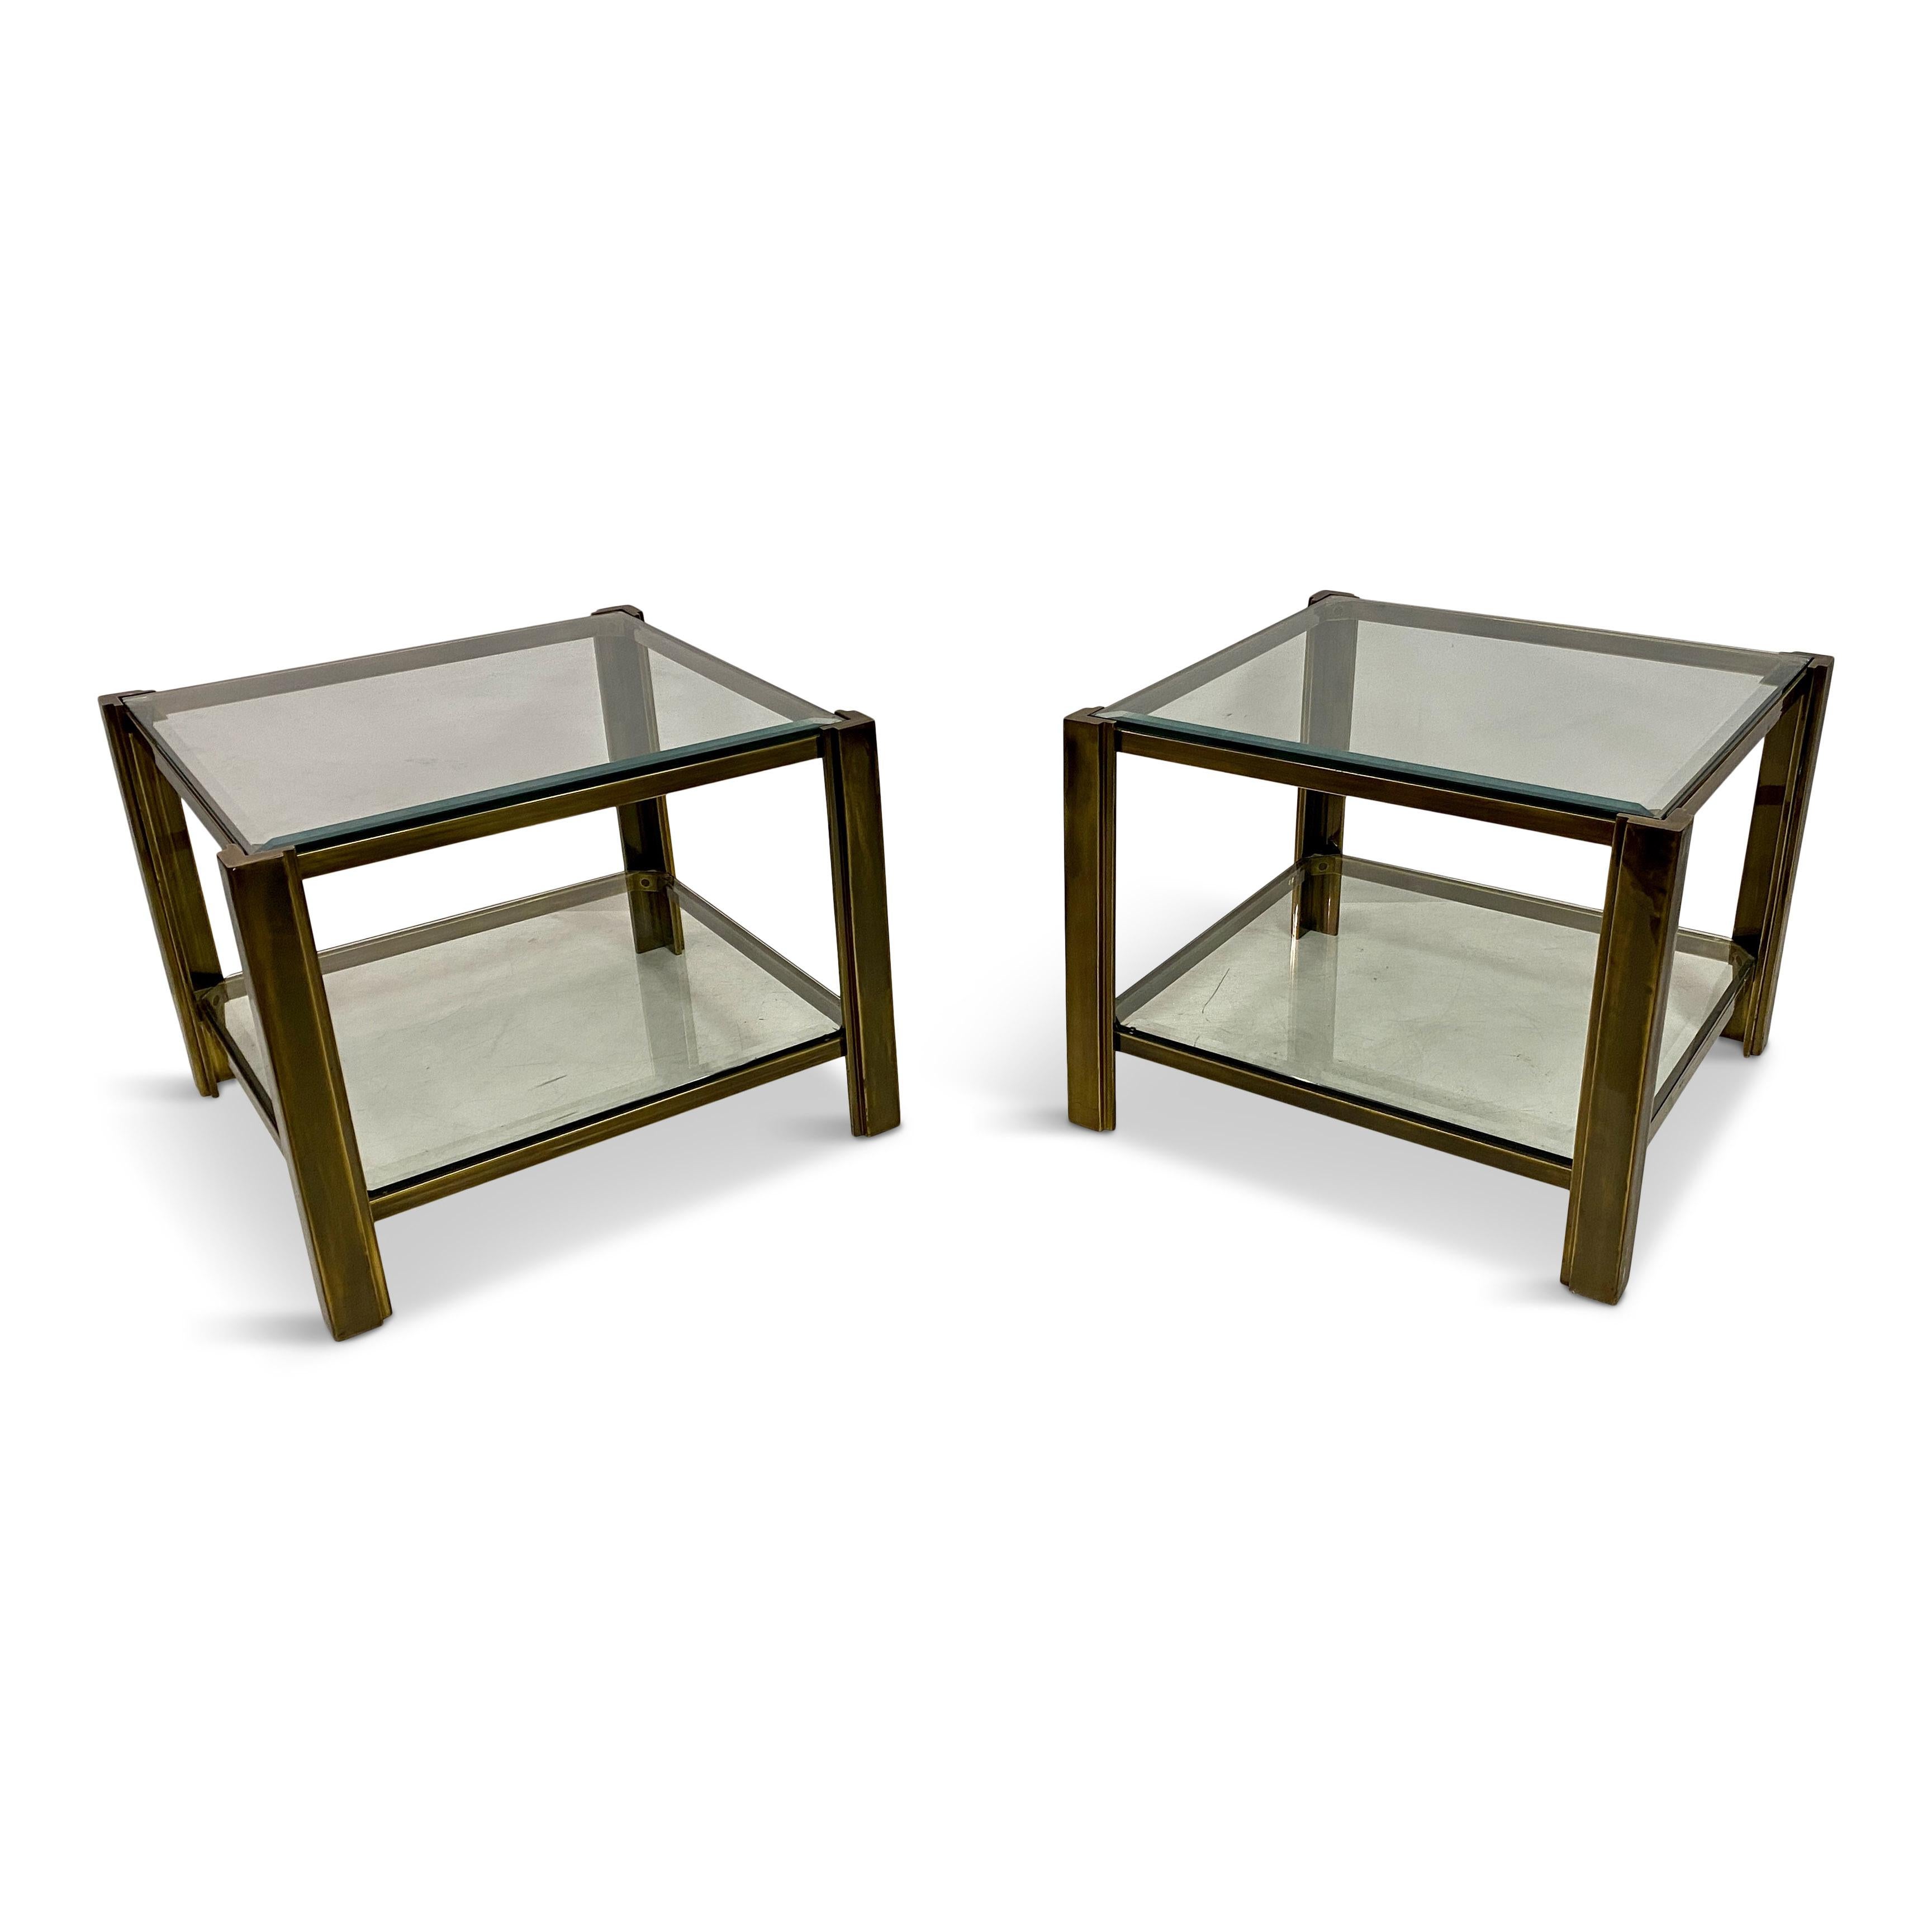 Pair of side tables

Brass 

Very heavy so possibly bronze

Two tier

Bevelled glass shelves

Late 20th Century